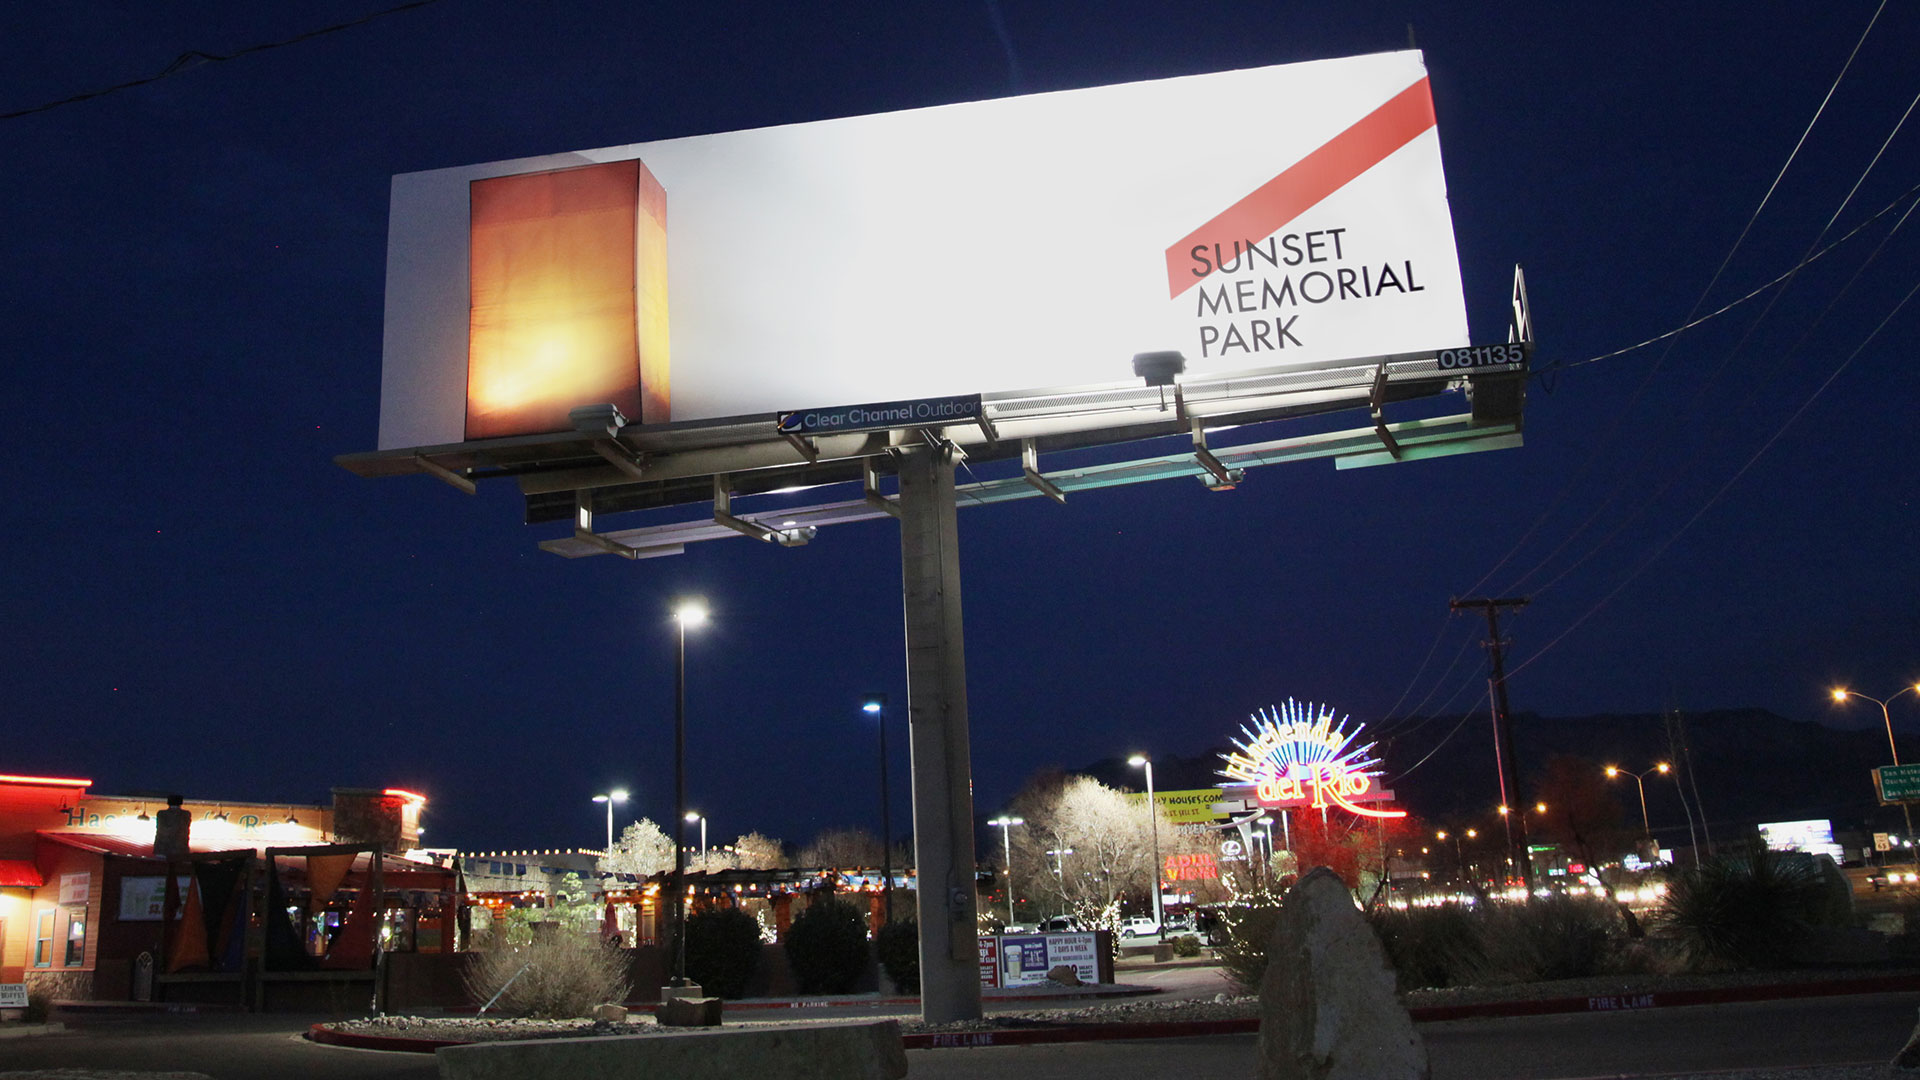 This Illuminated Billboard in Albuquerque Hopes to Change the Way People Fe...